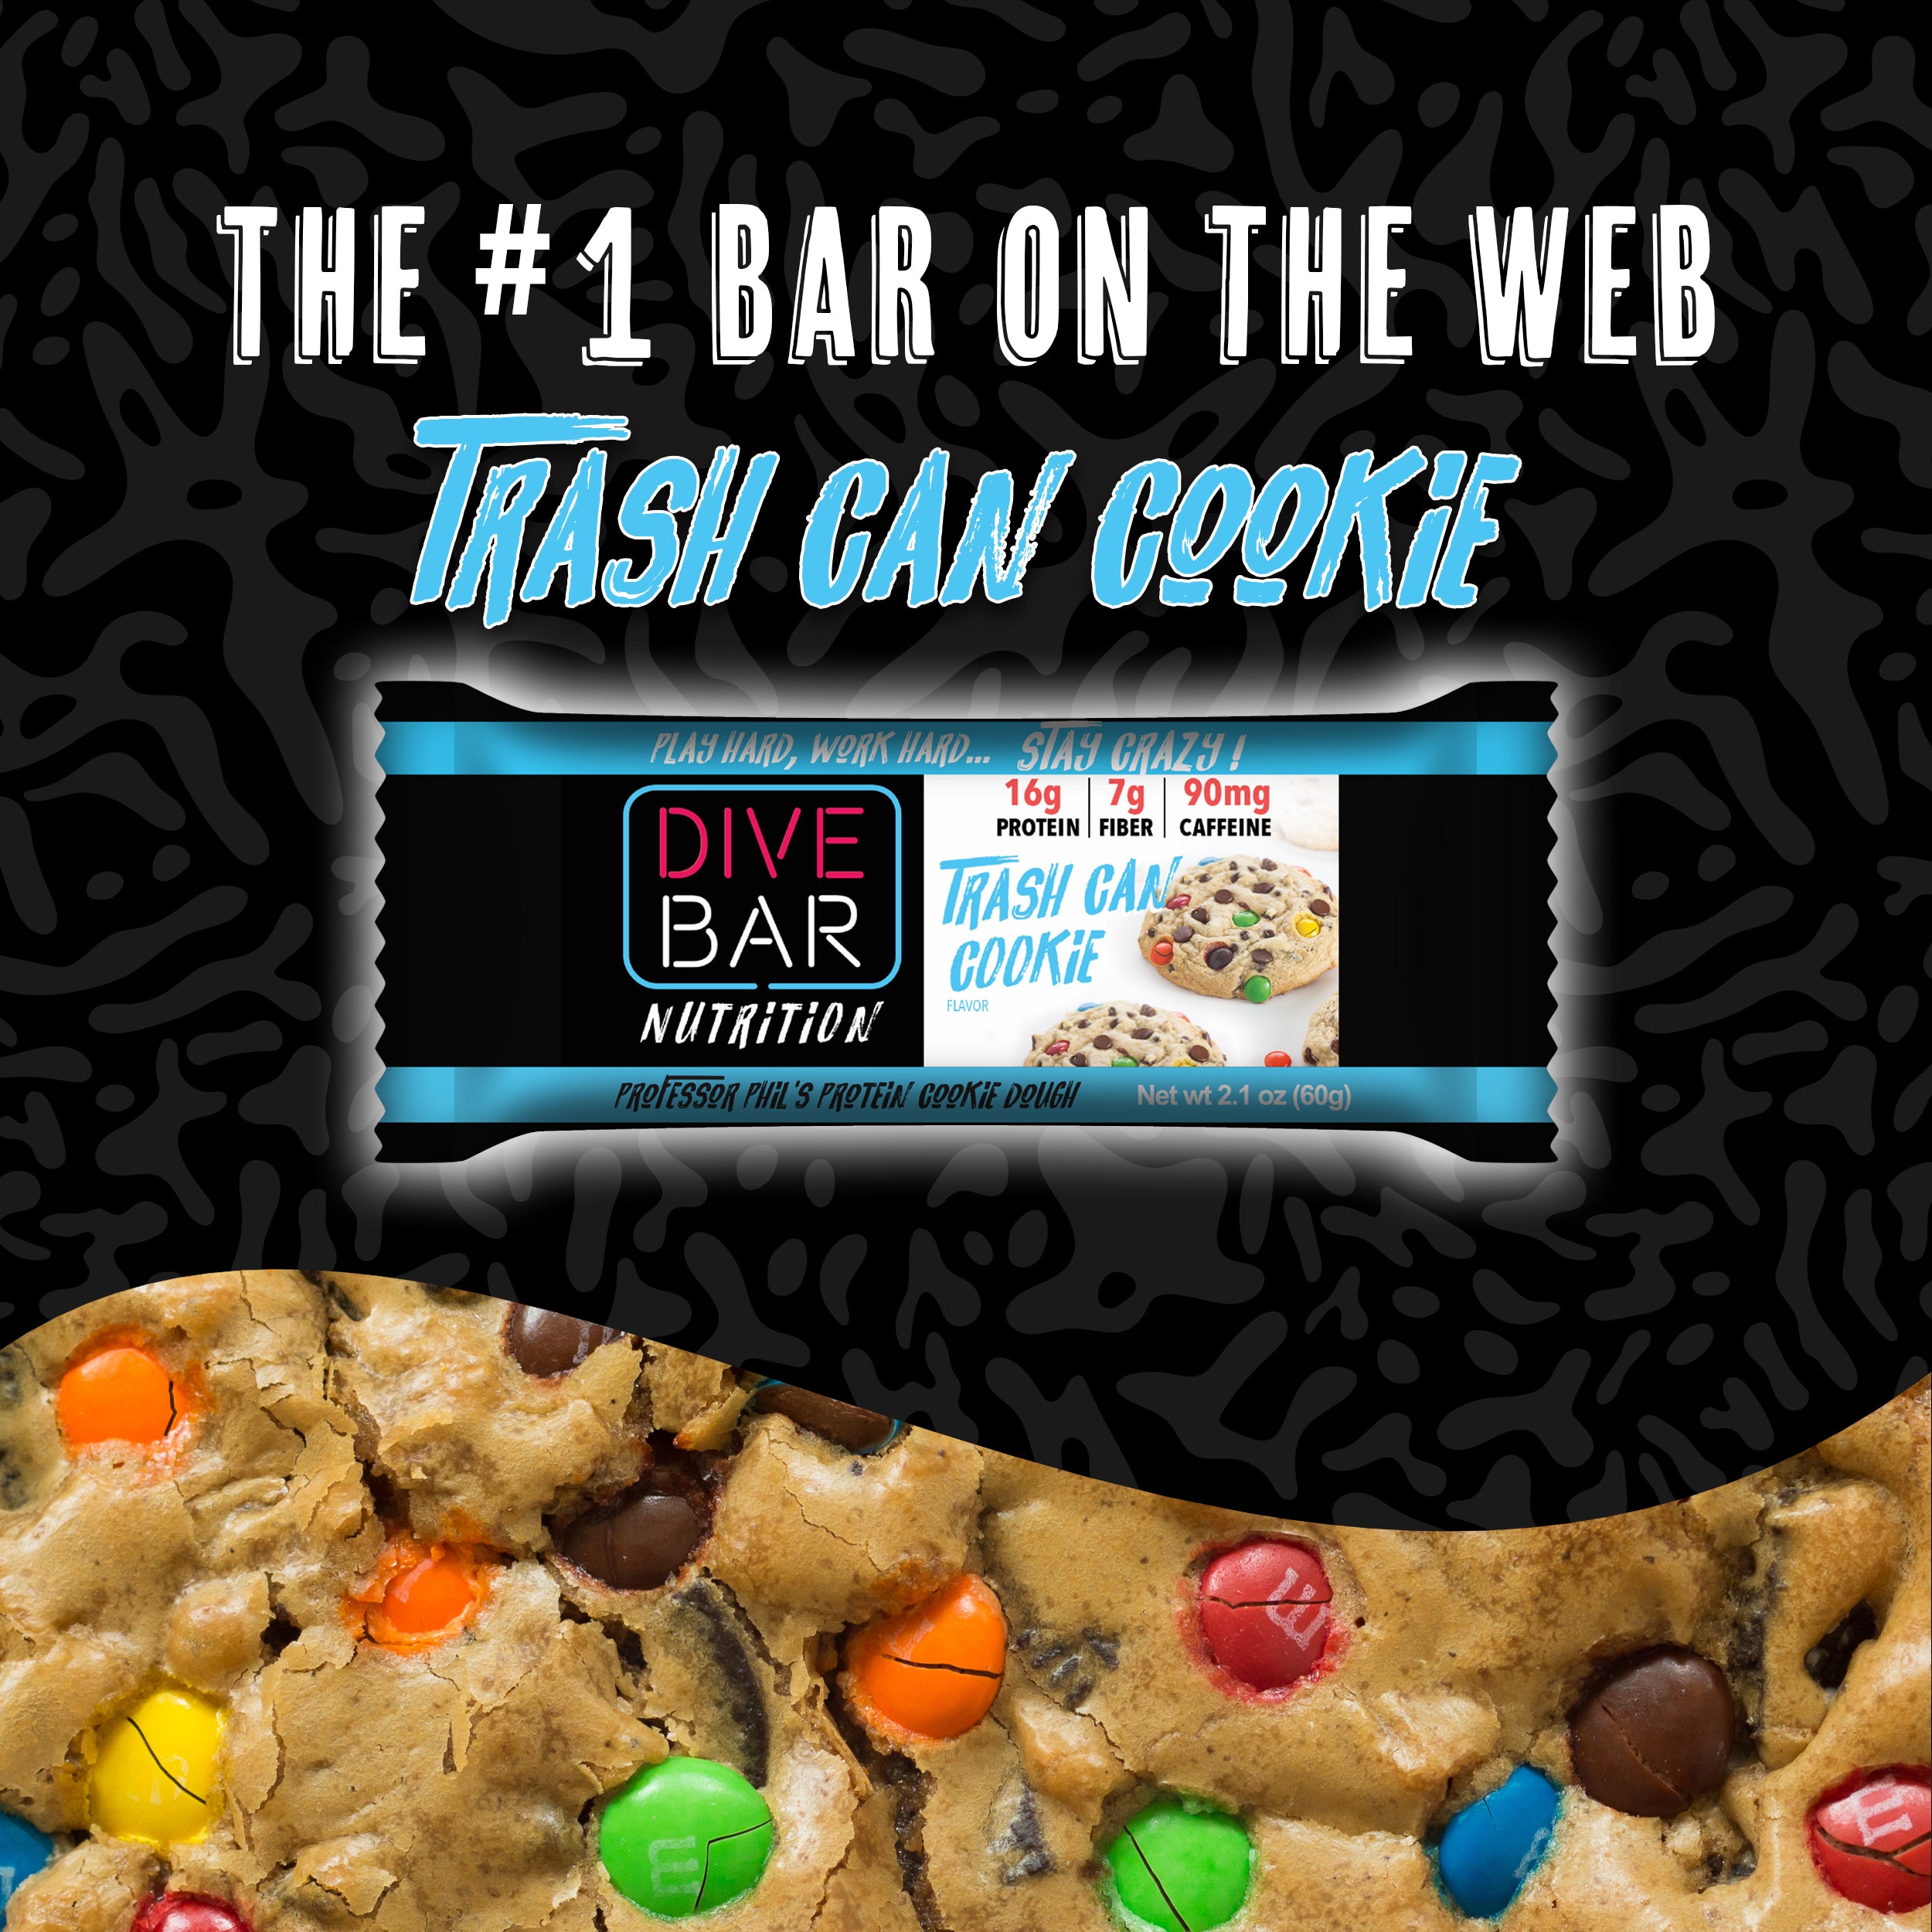 TRASH CAN COOKIE - 12 Bars